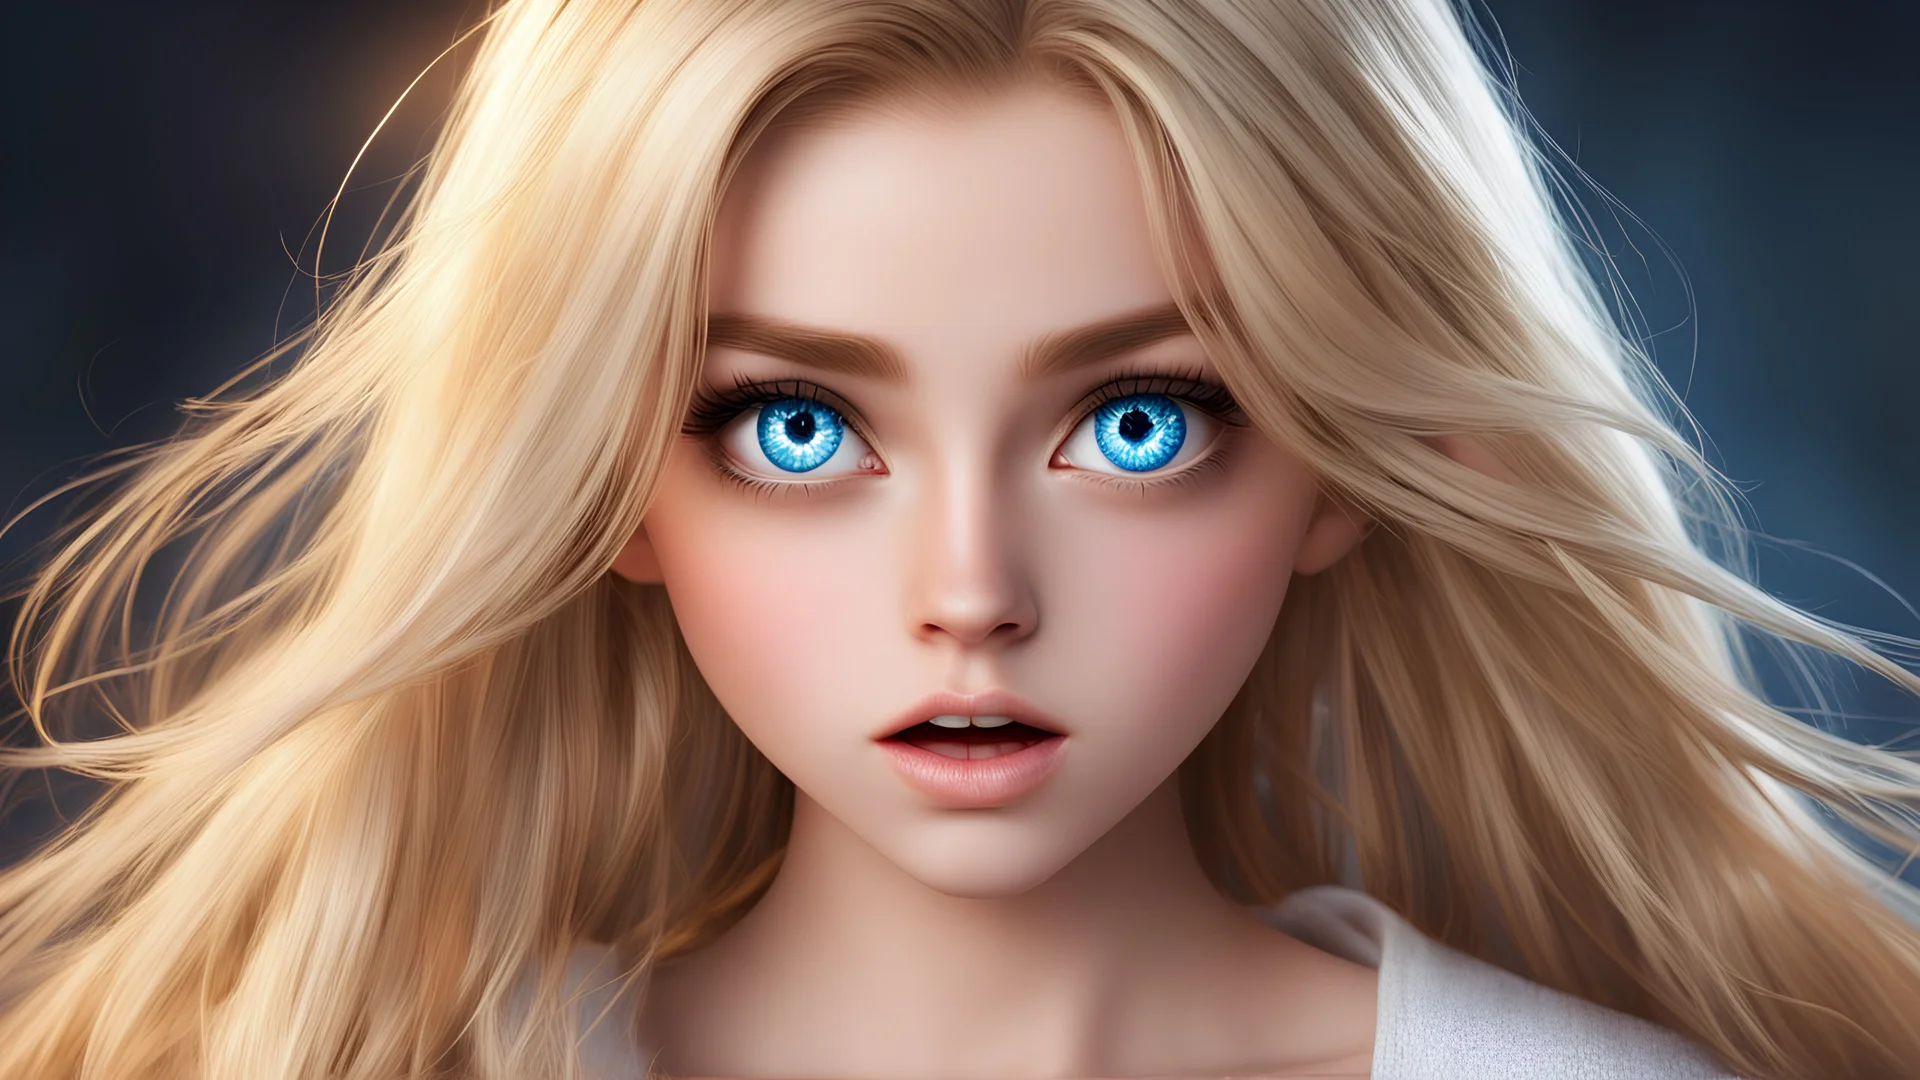 (detailed eyes:1.3), Beautiful Lighting, (1girl:blue eyes, blonde hair, absurdly long hair, hair between eyes), (real skin), (Style-DA:1.3), (((getAngry, crazy eyes, frustrated, blush, anger, anger vein, holding, reaching out, constricted pupils, too many pocker chip,upper body))),poker chip,depth of field,indoors,casino,casino card table,leaning forward,slot machine,casino room,carpet, (AS-YoungV2:1.3),, (tank top:1.1), denim short